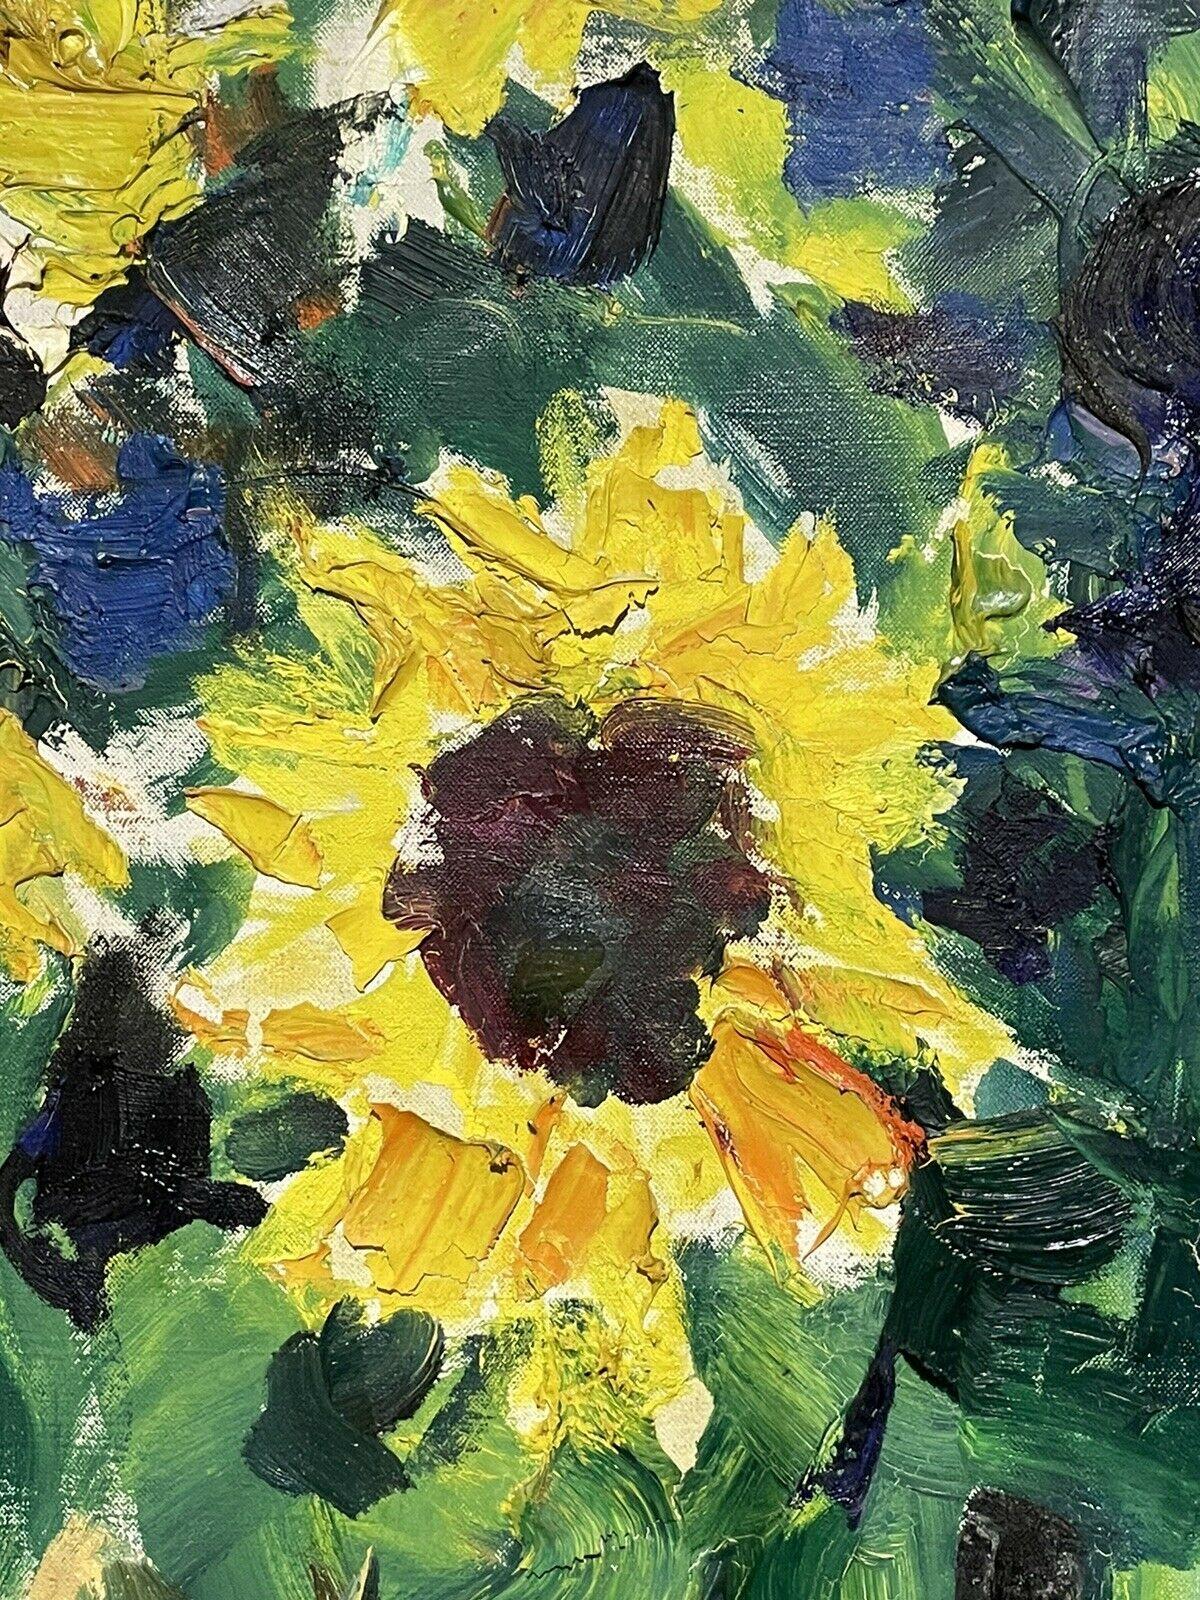 picasso sunflowers